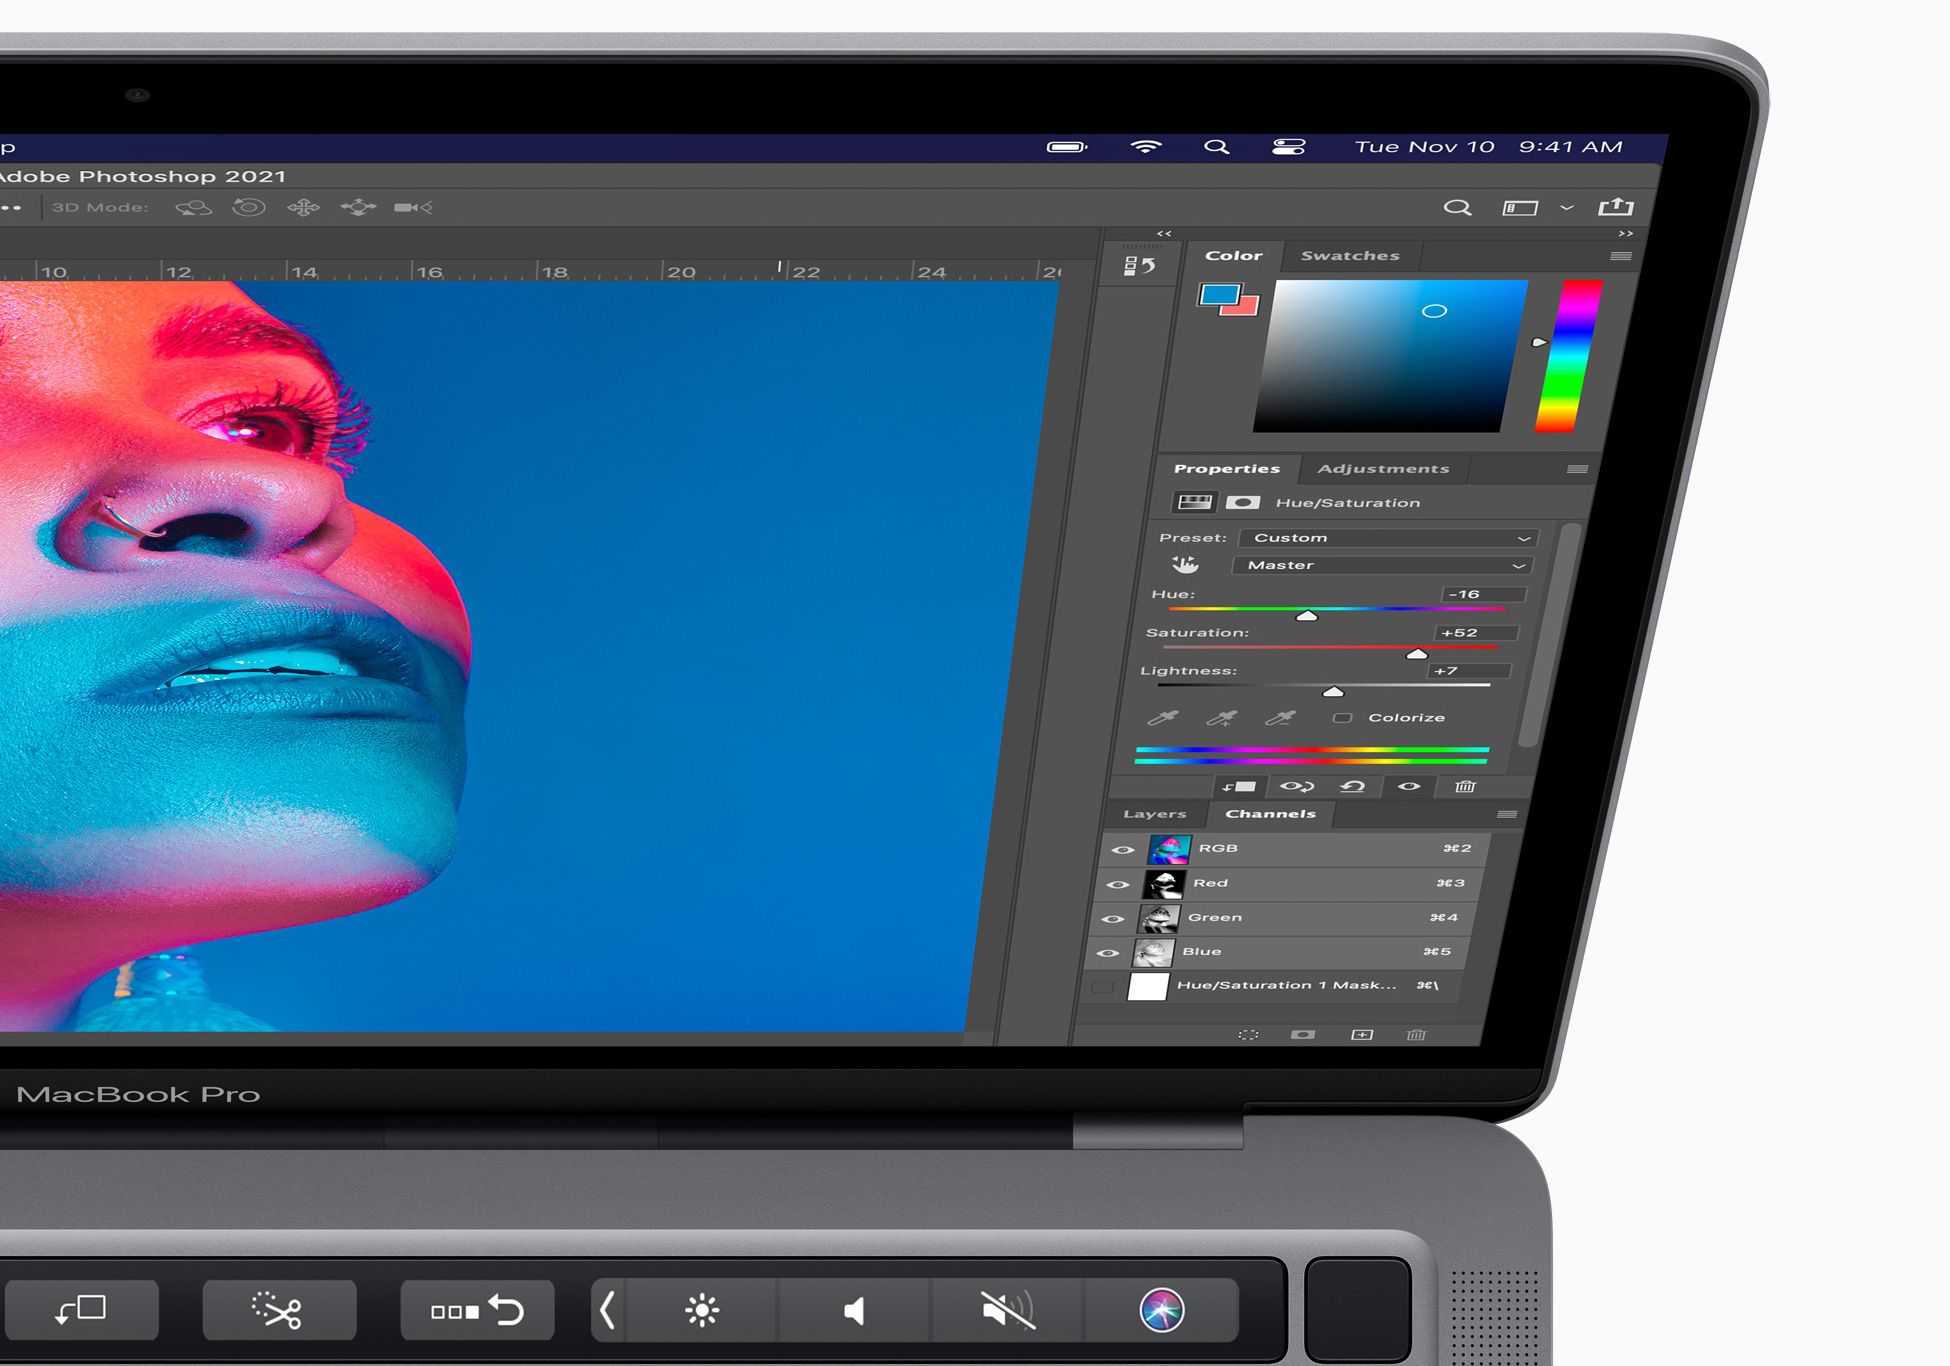 Adobe Photoshop is now available natively on M1 Macs